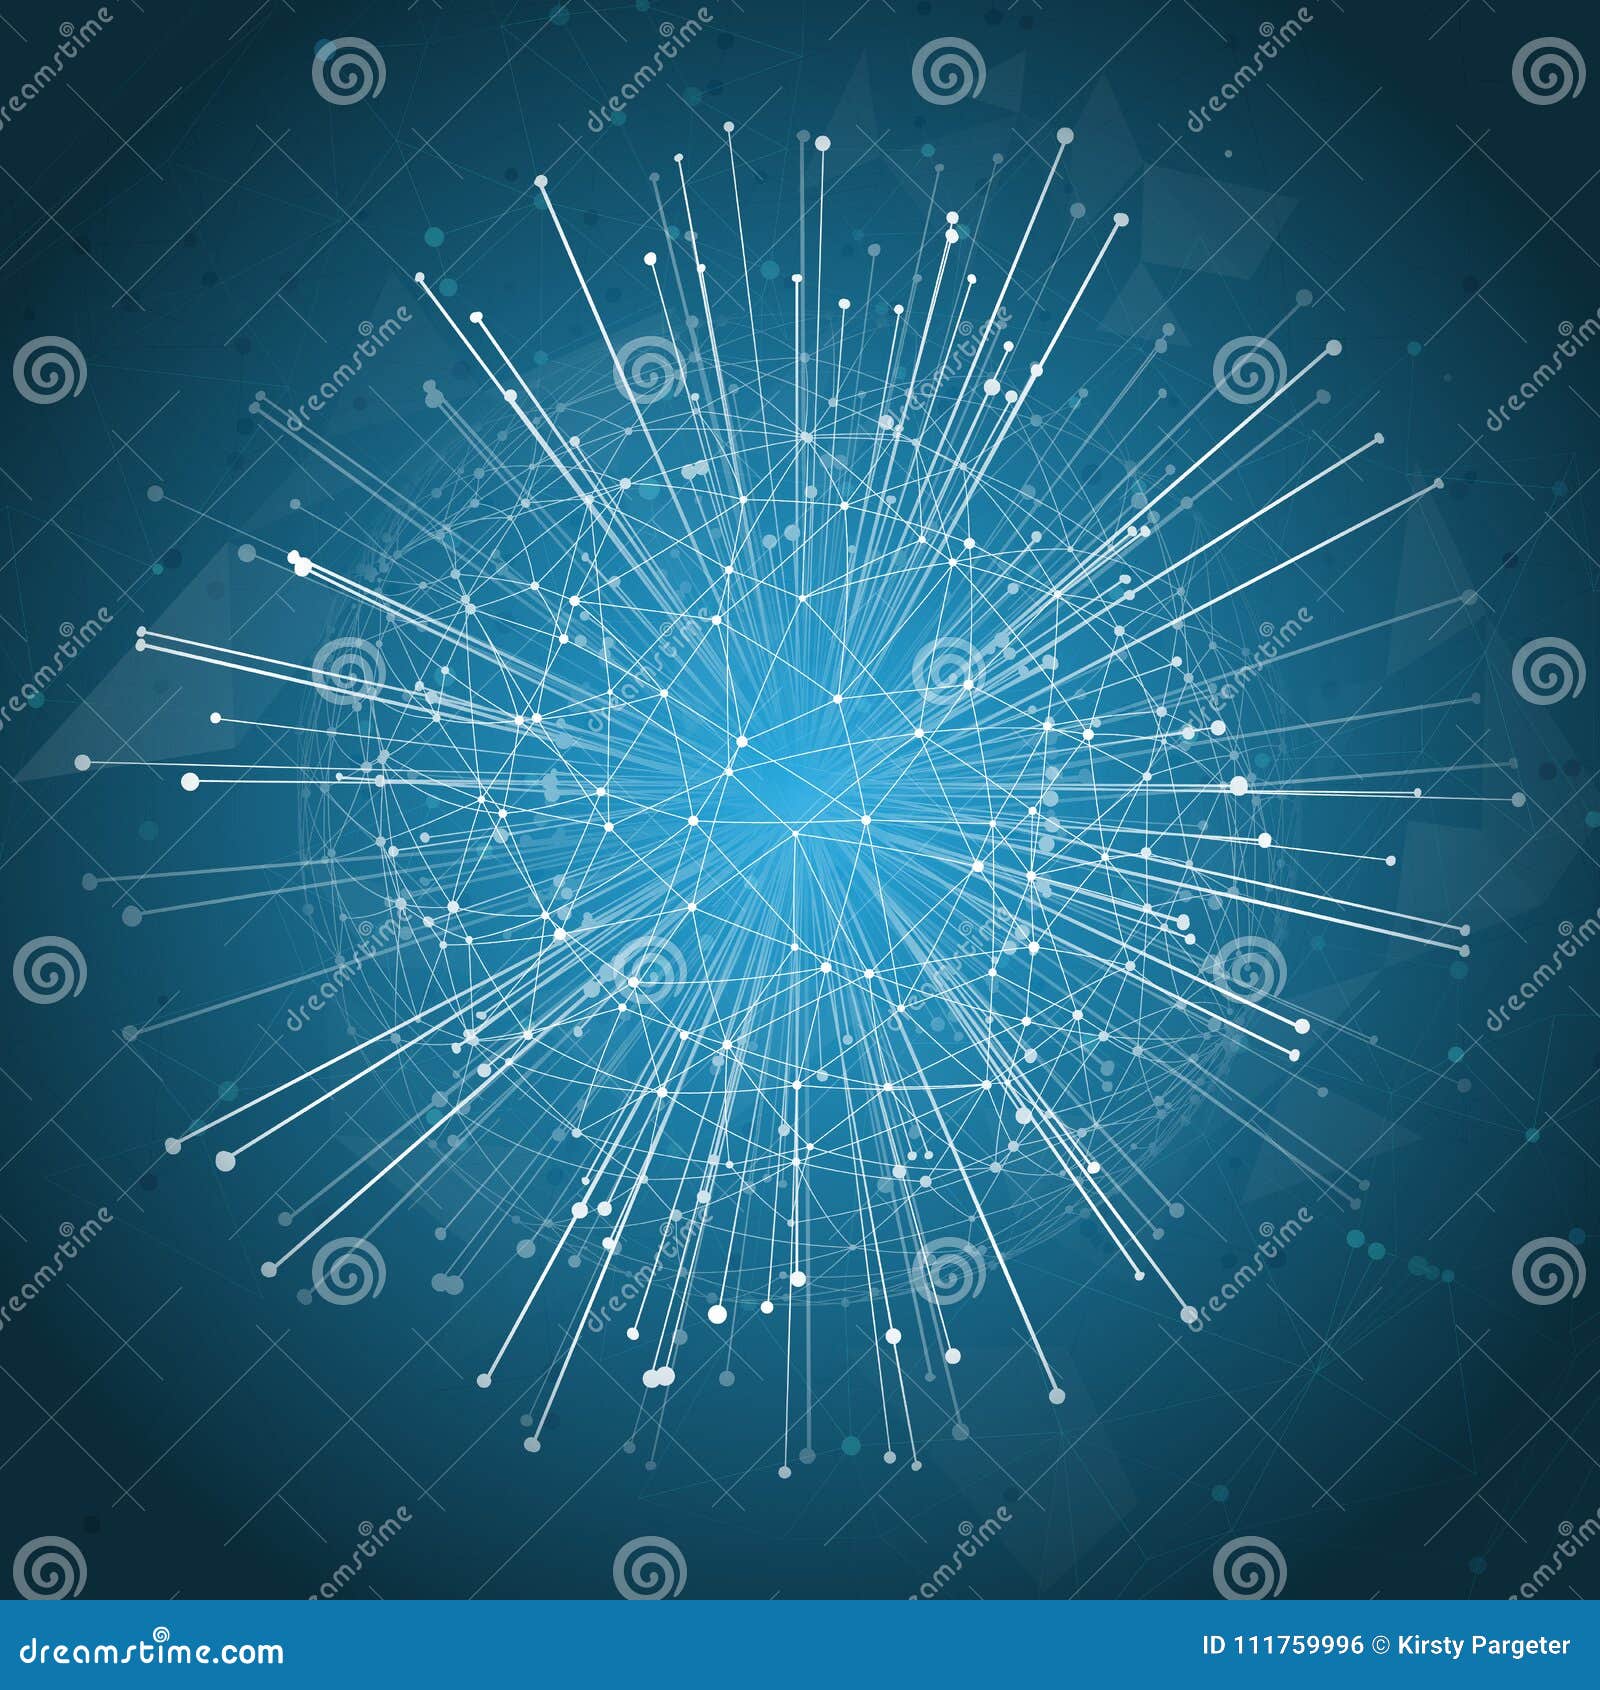 abstract globe network background with connecting lines and dots